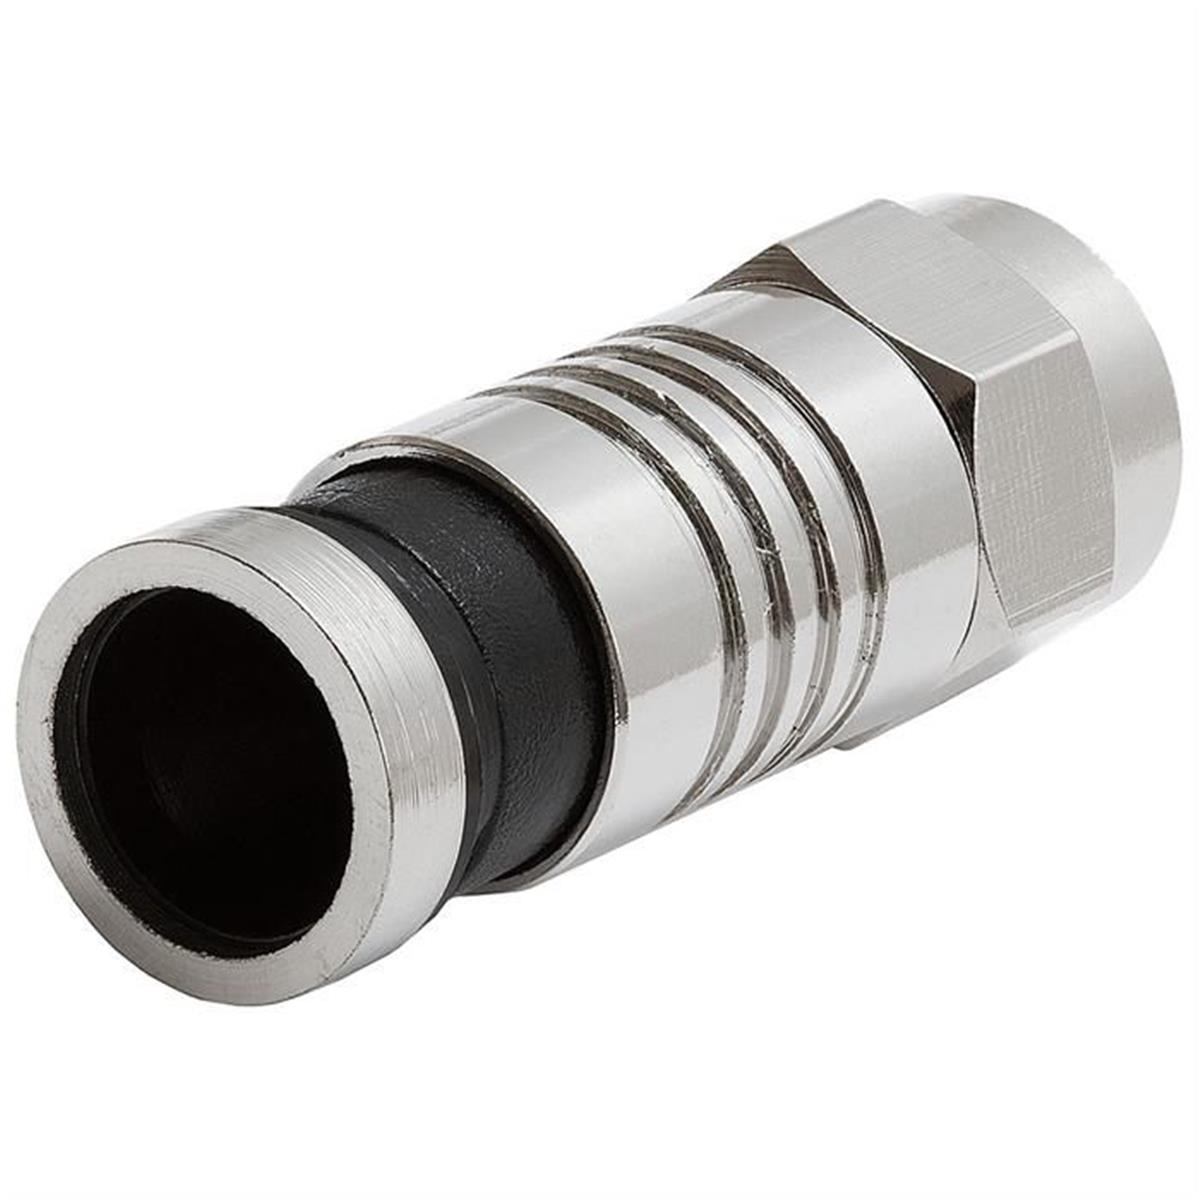 Picture of CMPLE 1189-N Compression Connector for RG6 with Black Tail